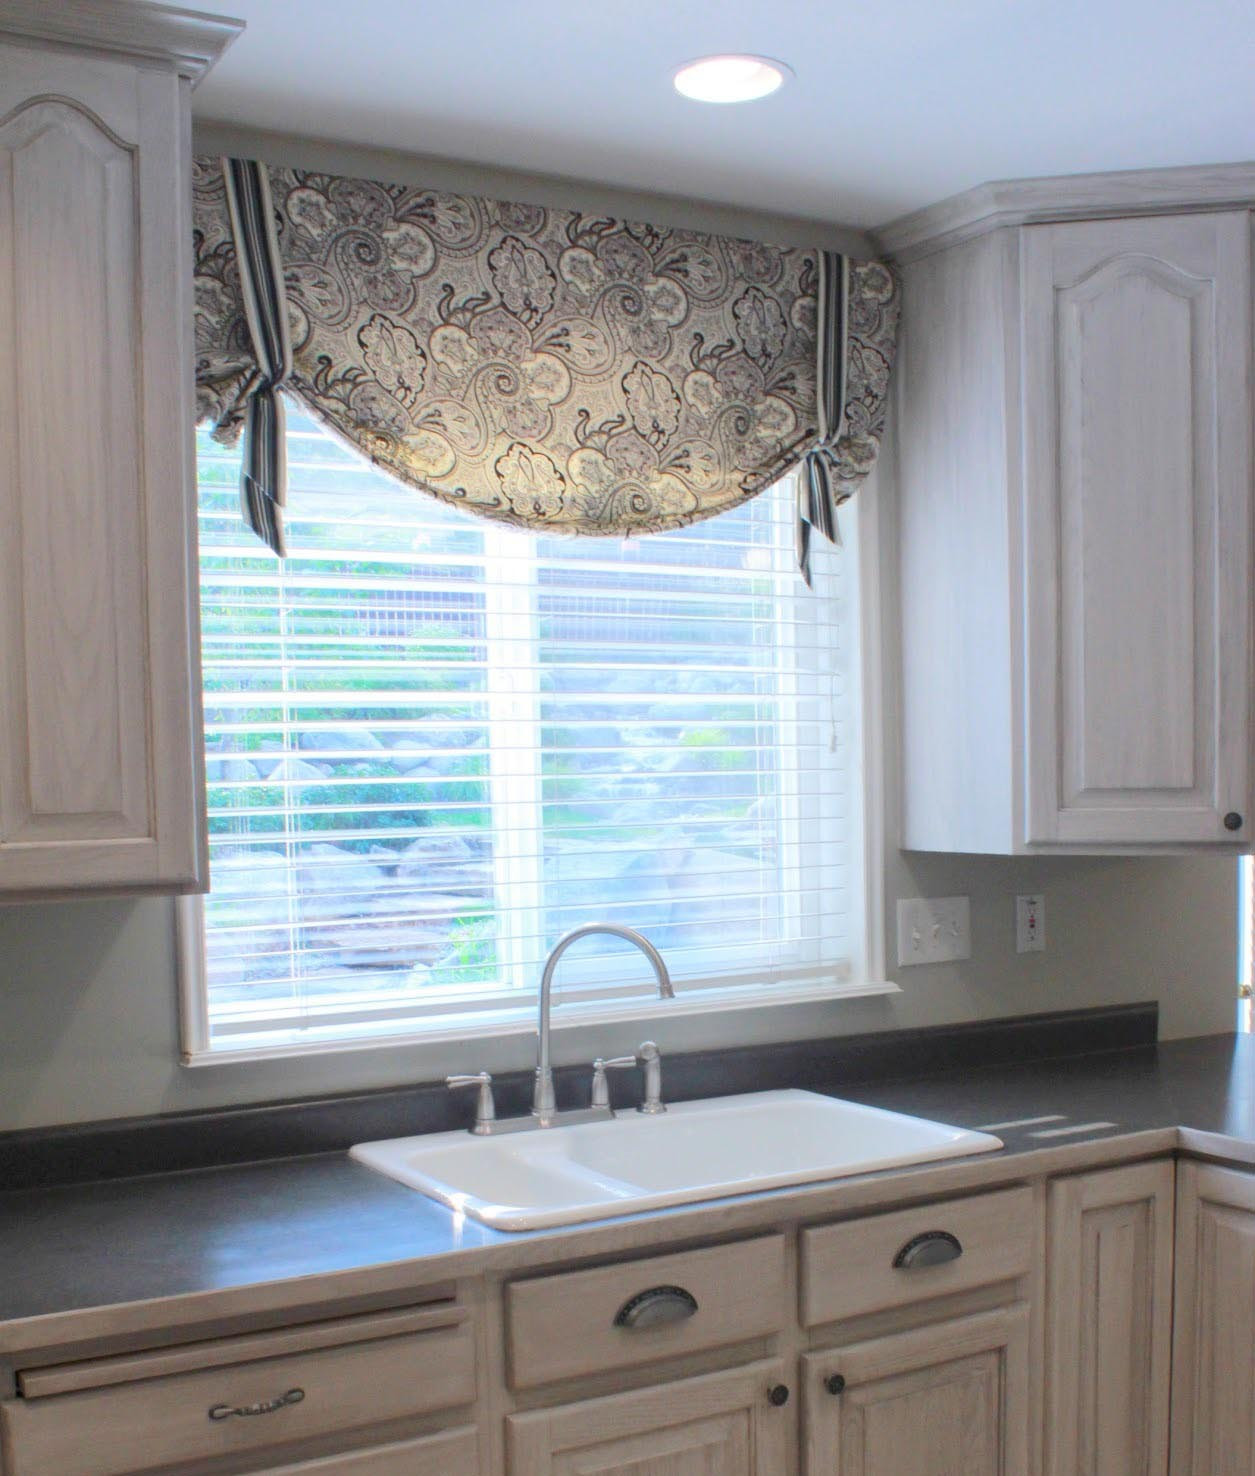 Small Kitchen Window Curtains
 Types of Valances for Kitchen